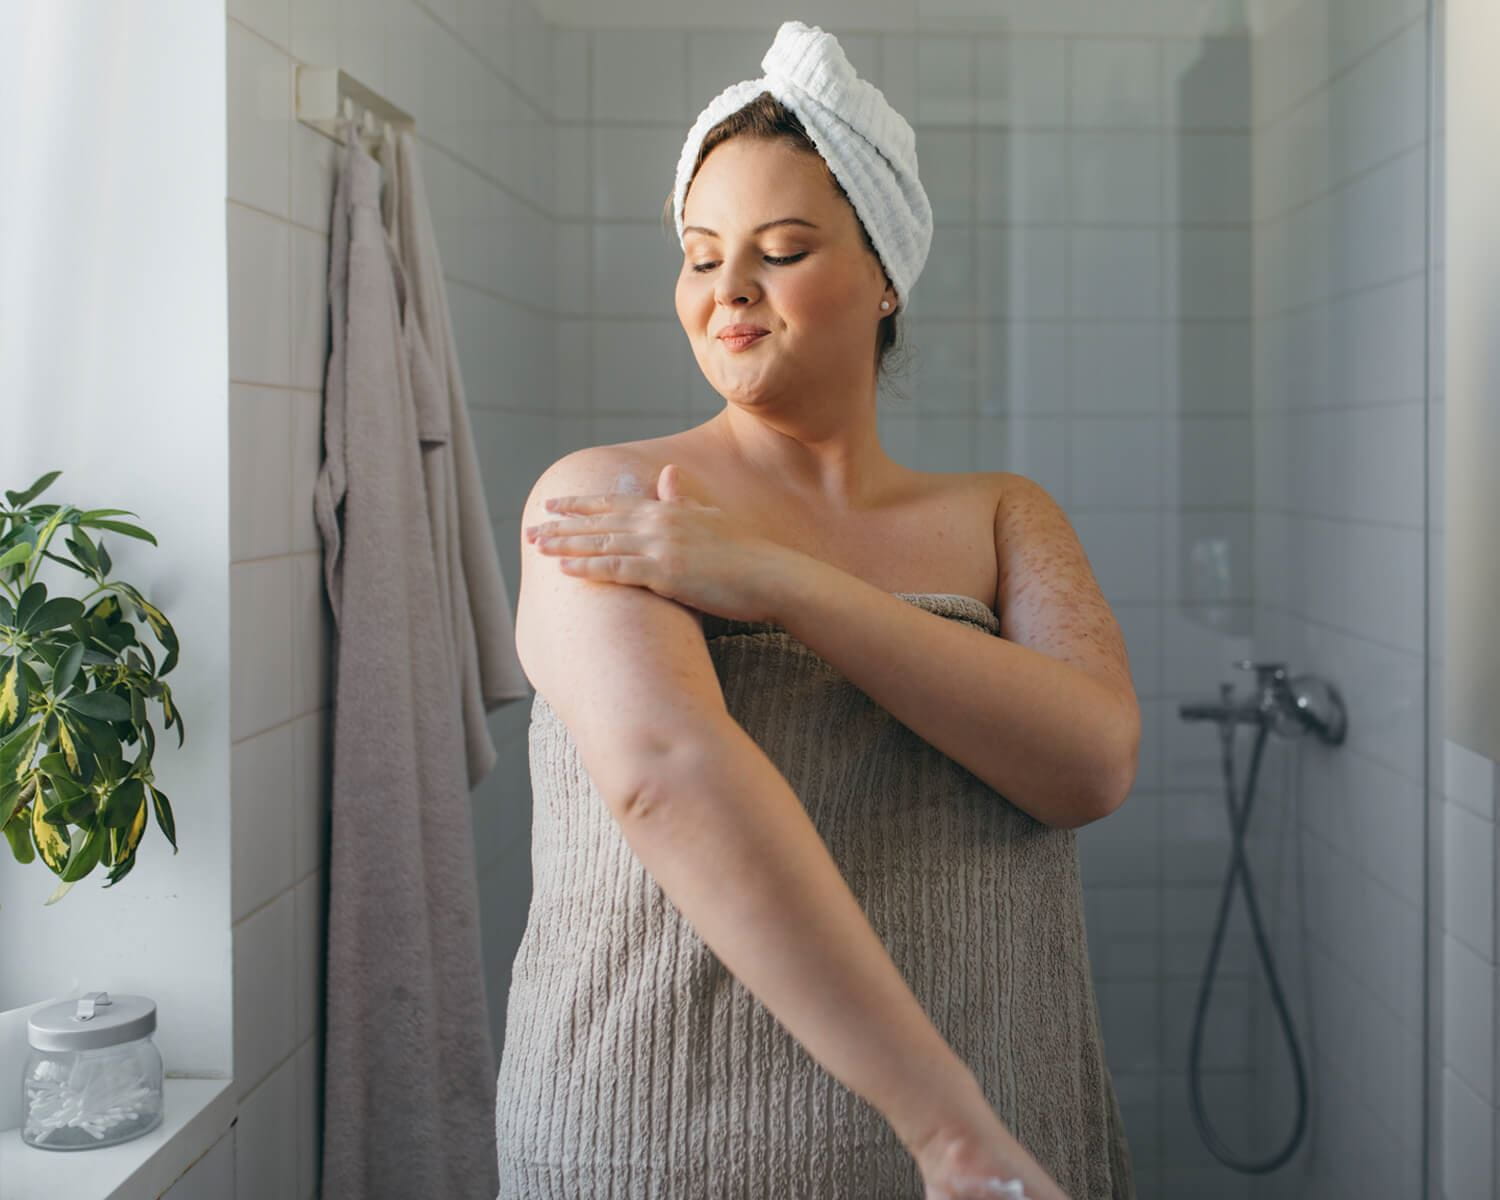 A shorter shower might help your skin